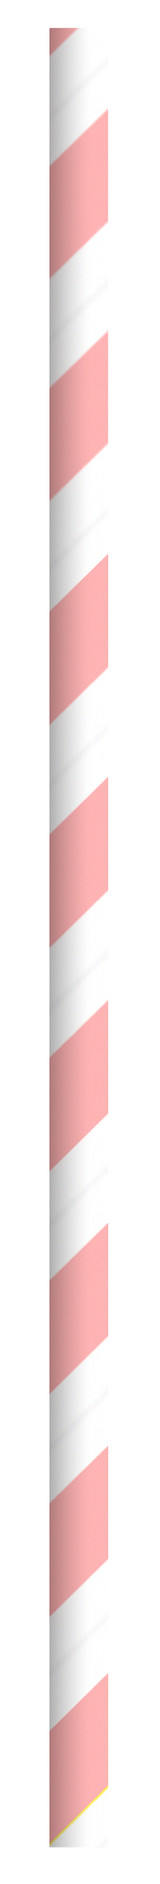 Durable Pink & White Striped Paper Straws - Wrapped - D:0.2in L:7.75in - 3000 pcs